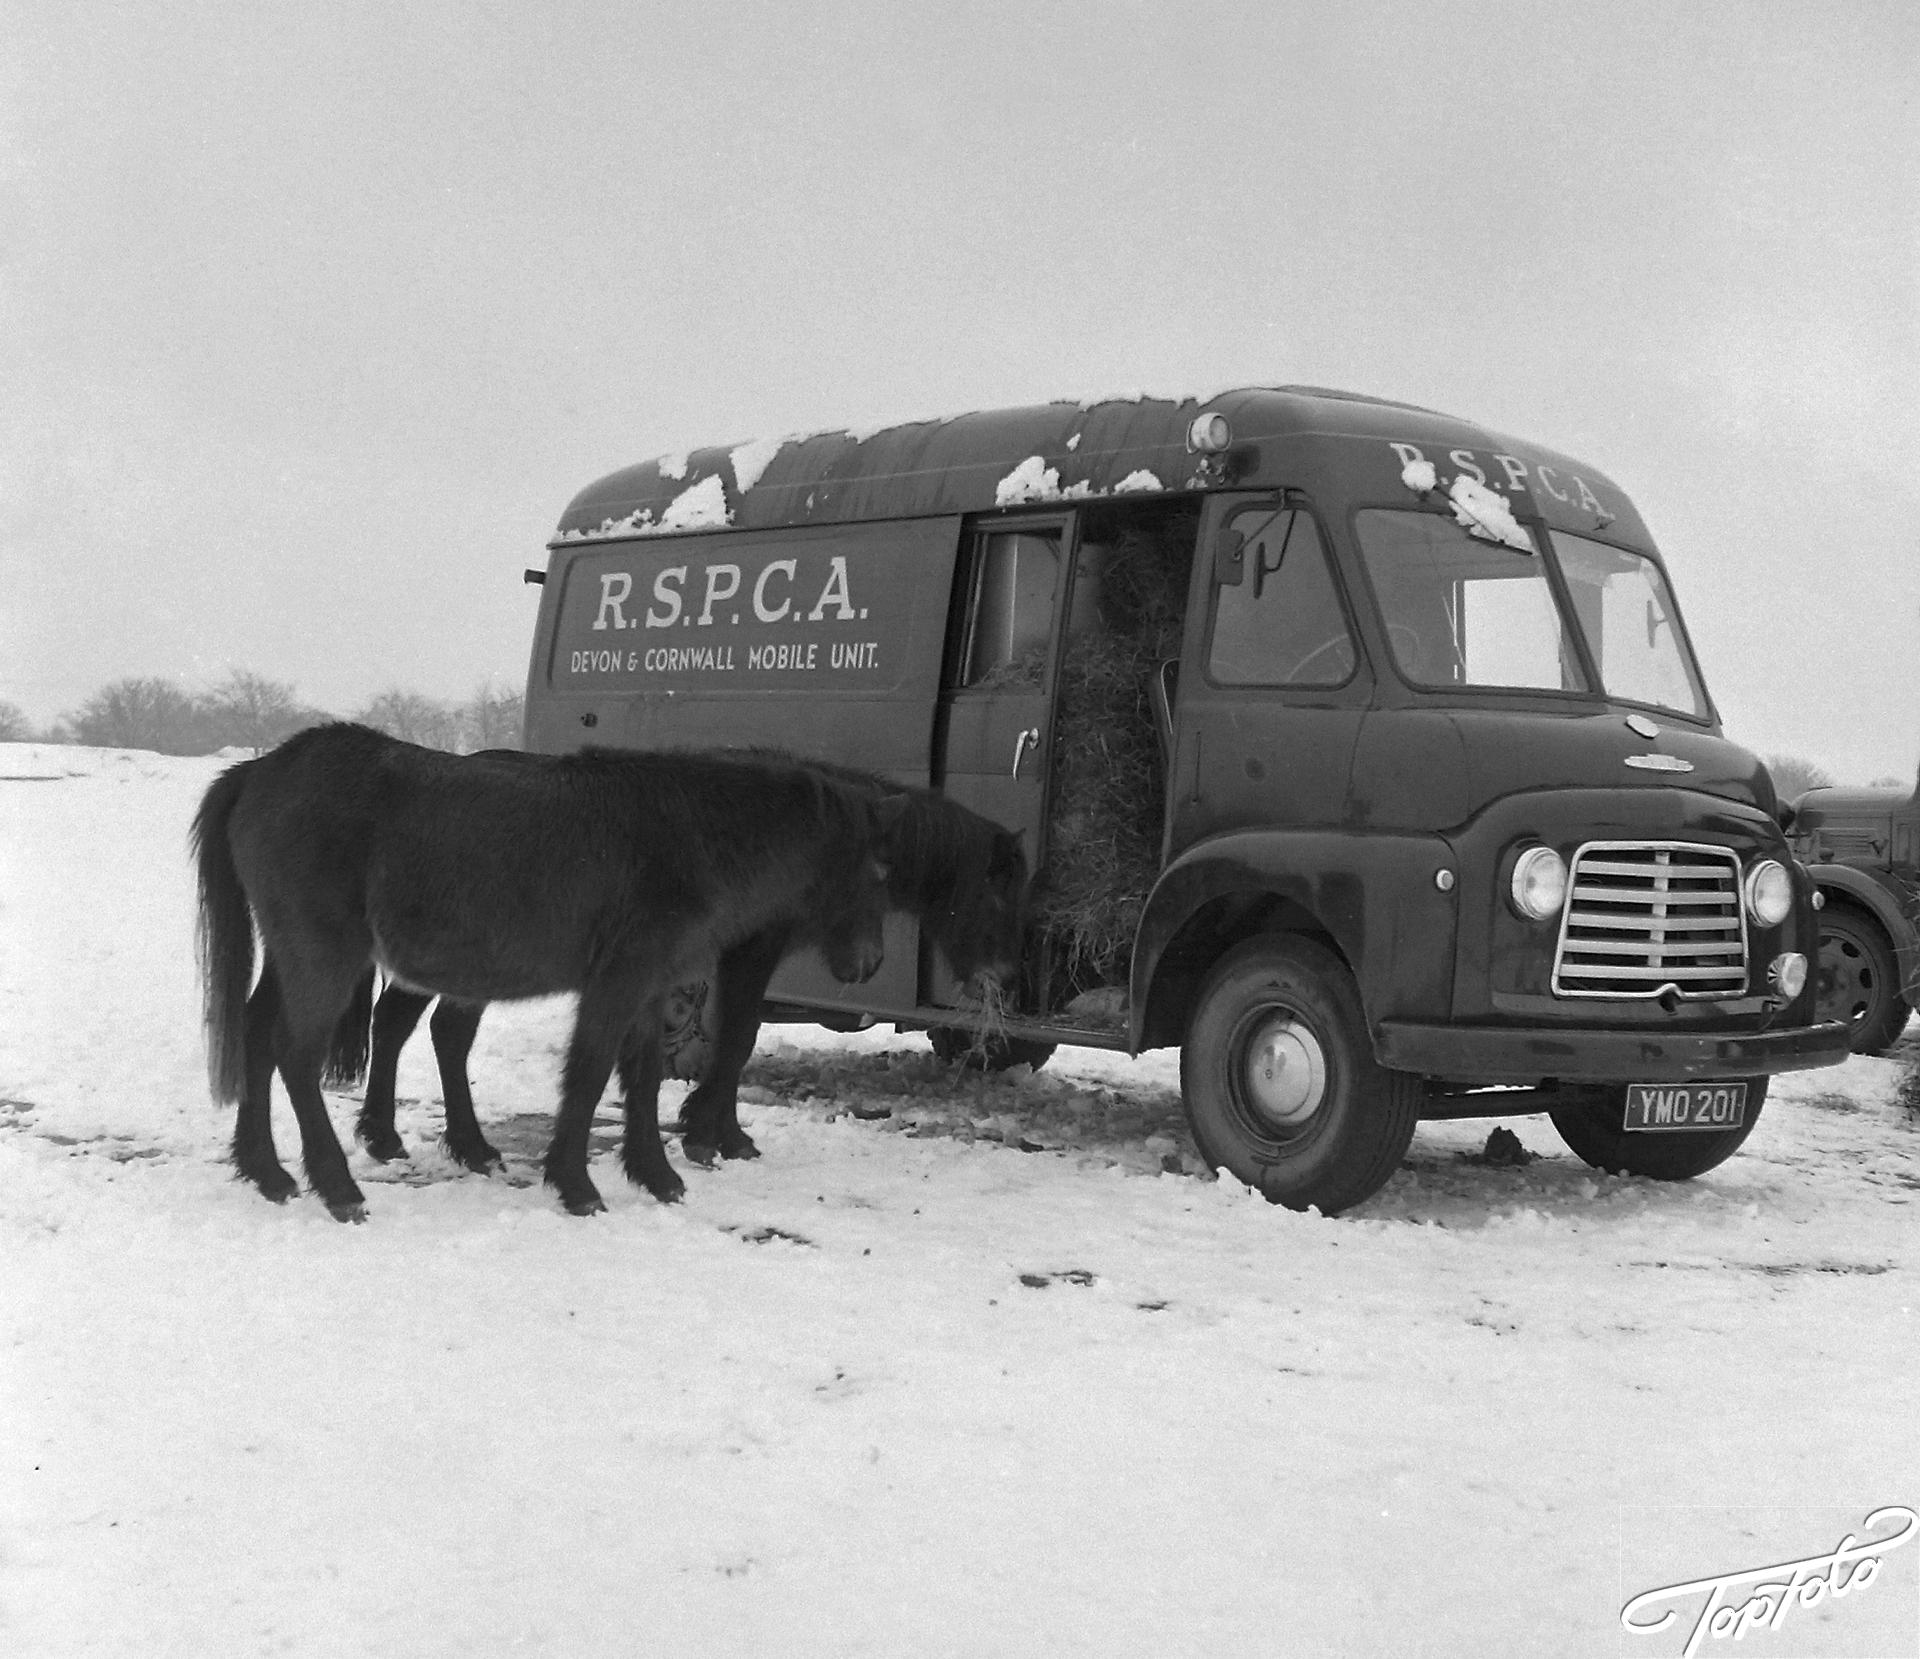 5 JANUARY 1963 A MOBILE RSPCA VAN FEEDS STARVING DARTMOOR PONIES AFTER HEAVY SNOW AND PROLONGED COLD WEATHER HAS CAUSED A CRISIS IN THE REMOTE REGIONS OF BRITAIN. YALVERTON, DEVON, ENGLAND.